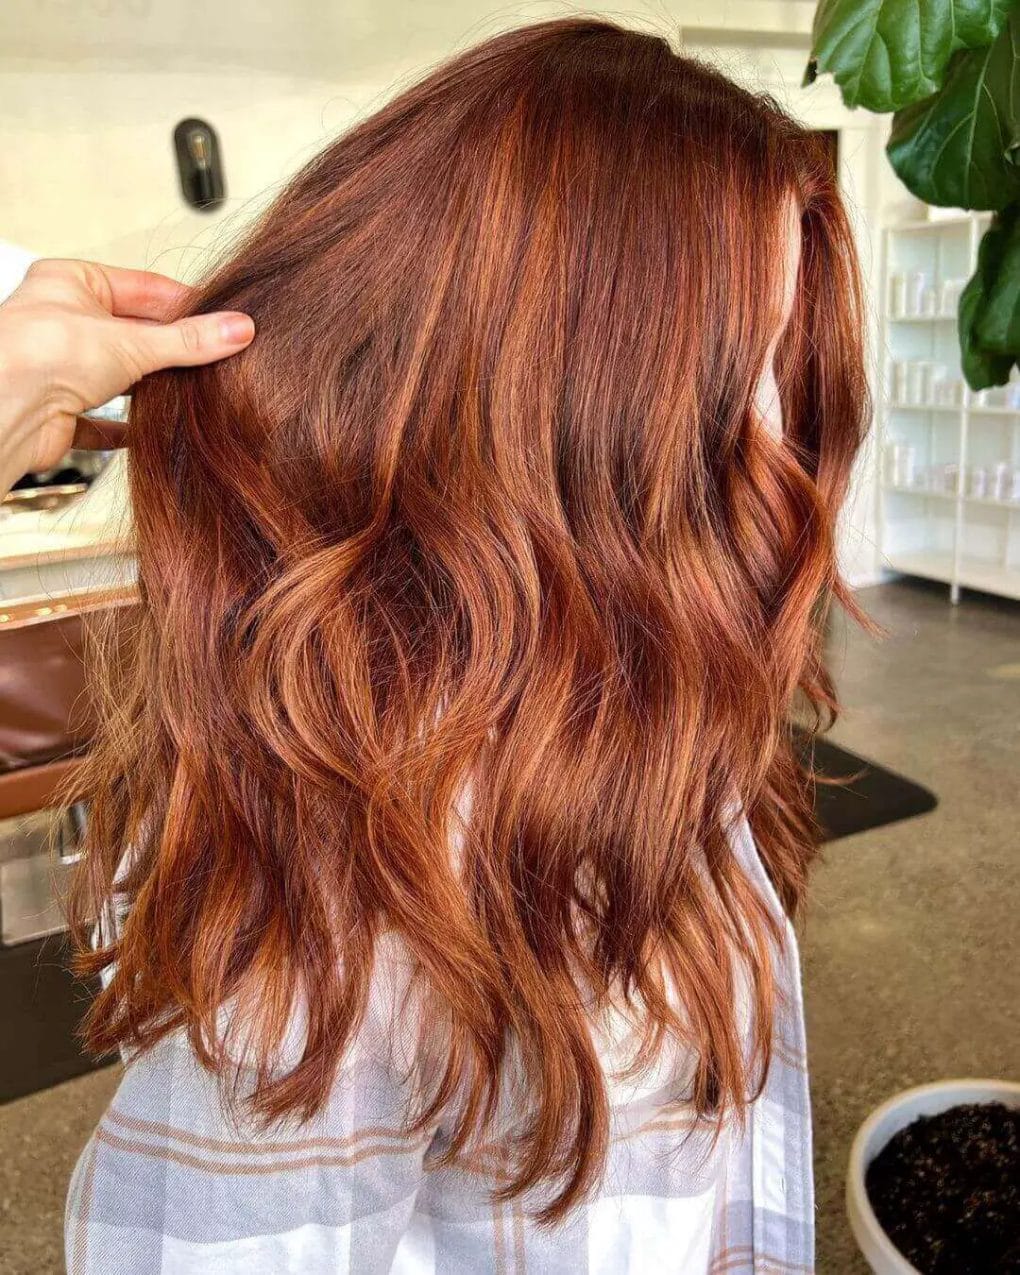 Dimensional red balayage with sunset hues, layered waves.